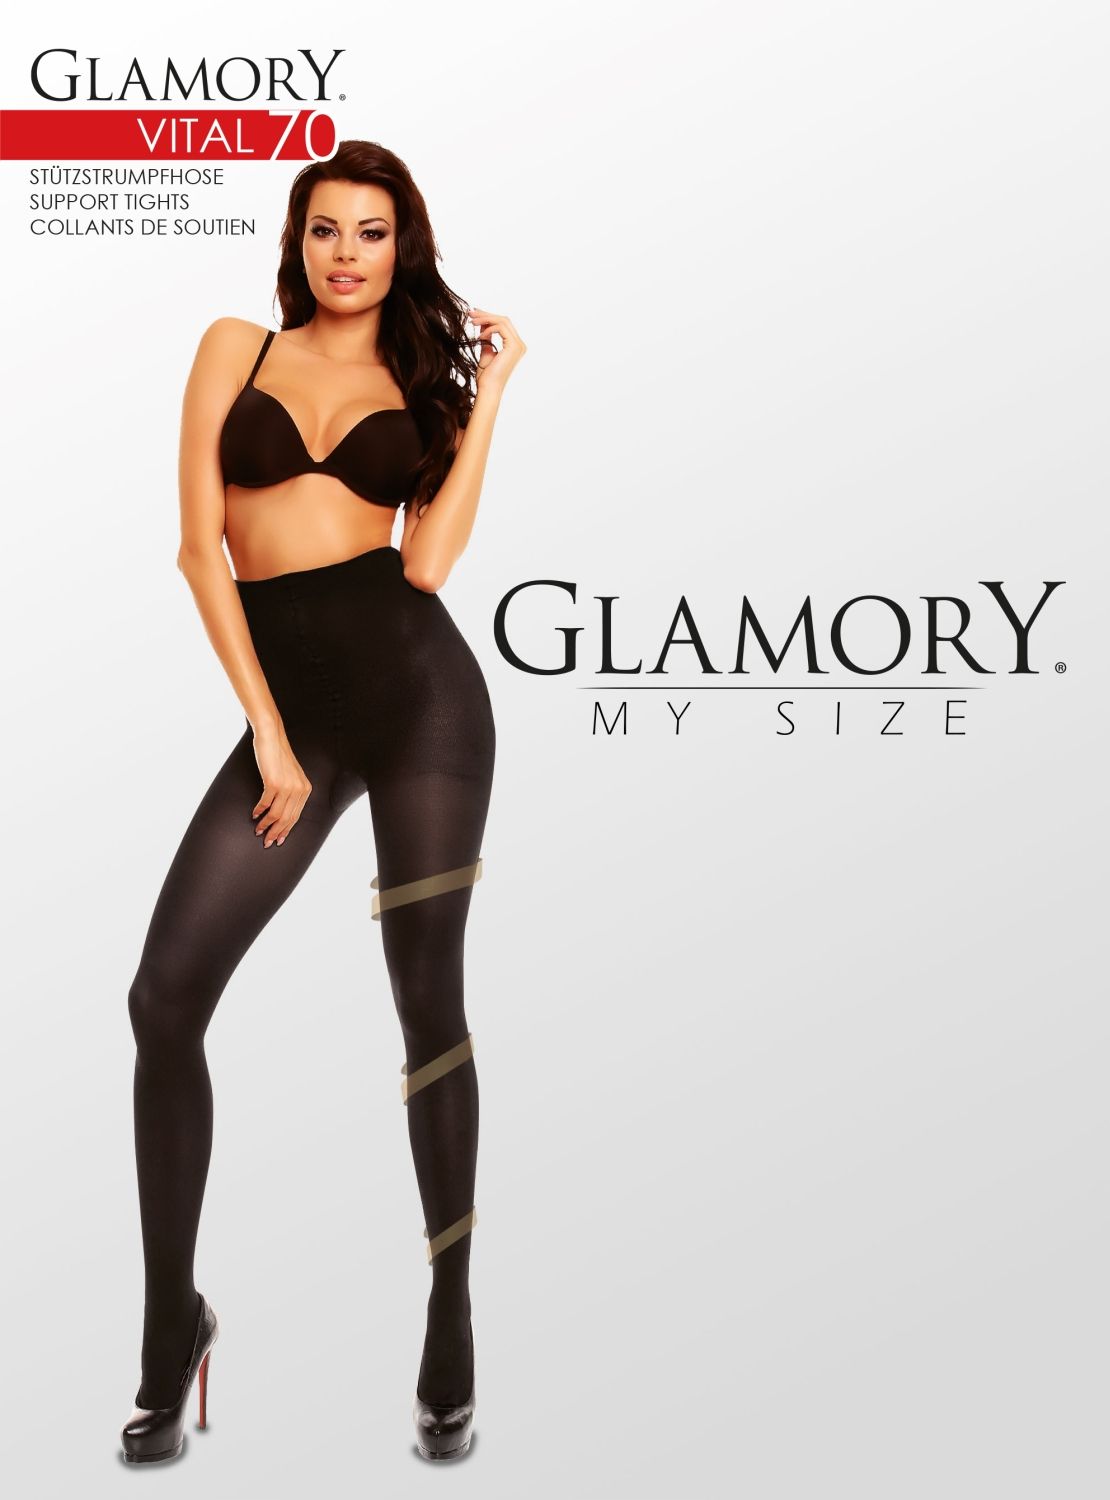 Glamory Vital 70 Support Tights 3-Pack